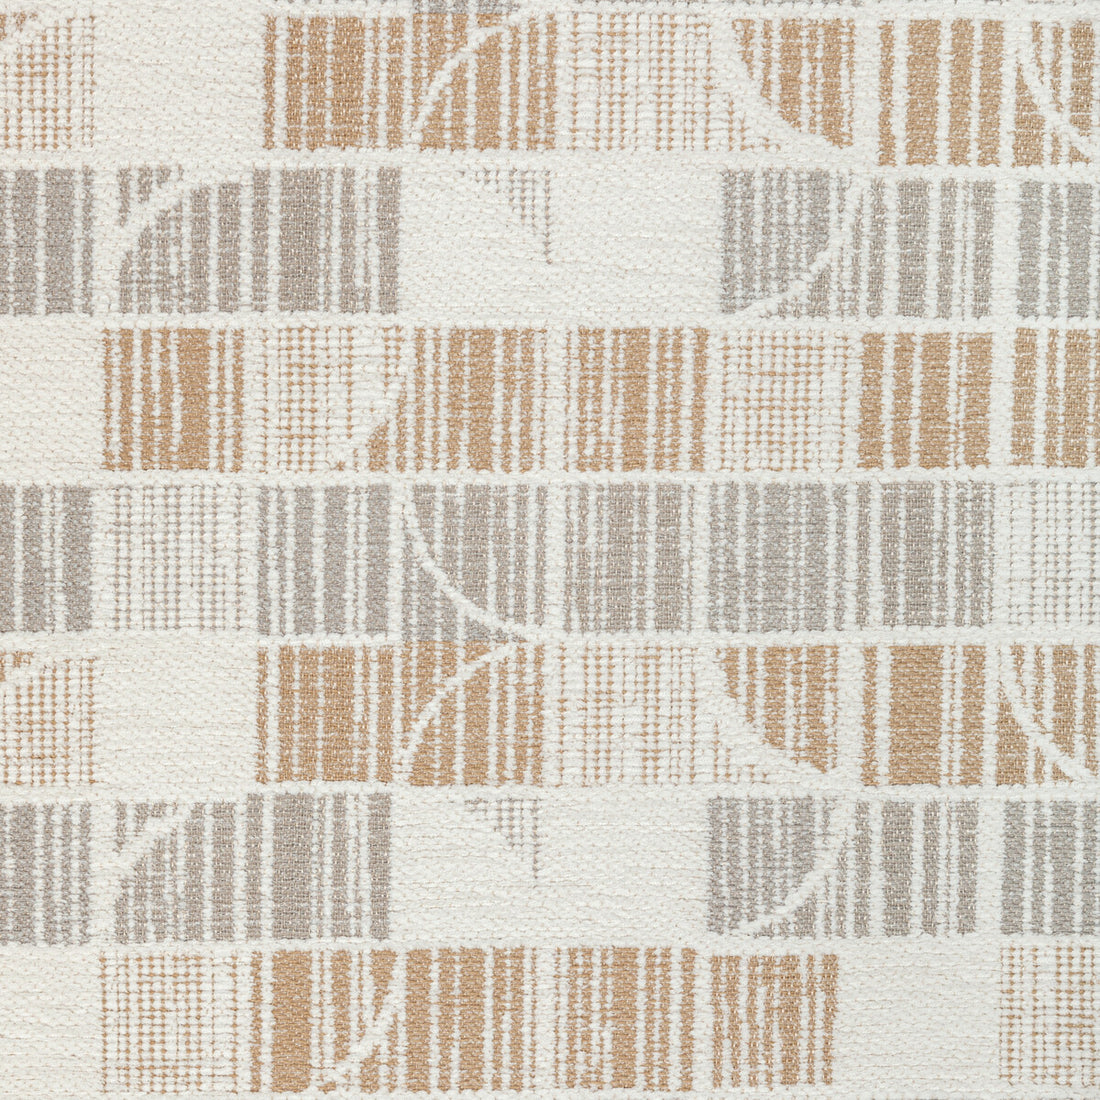 Upswing fabric in dune color - pattern 36521.106.0 - by Kravet Contract in the Seaqual collection